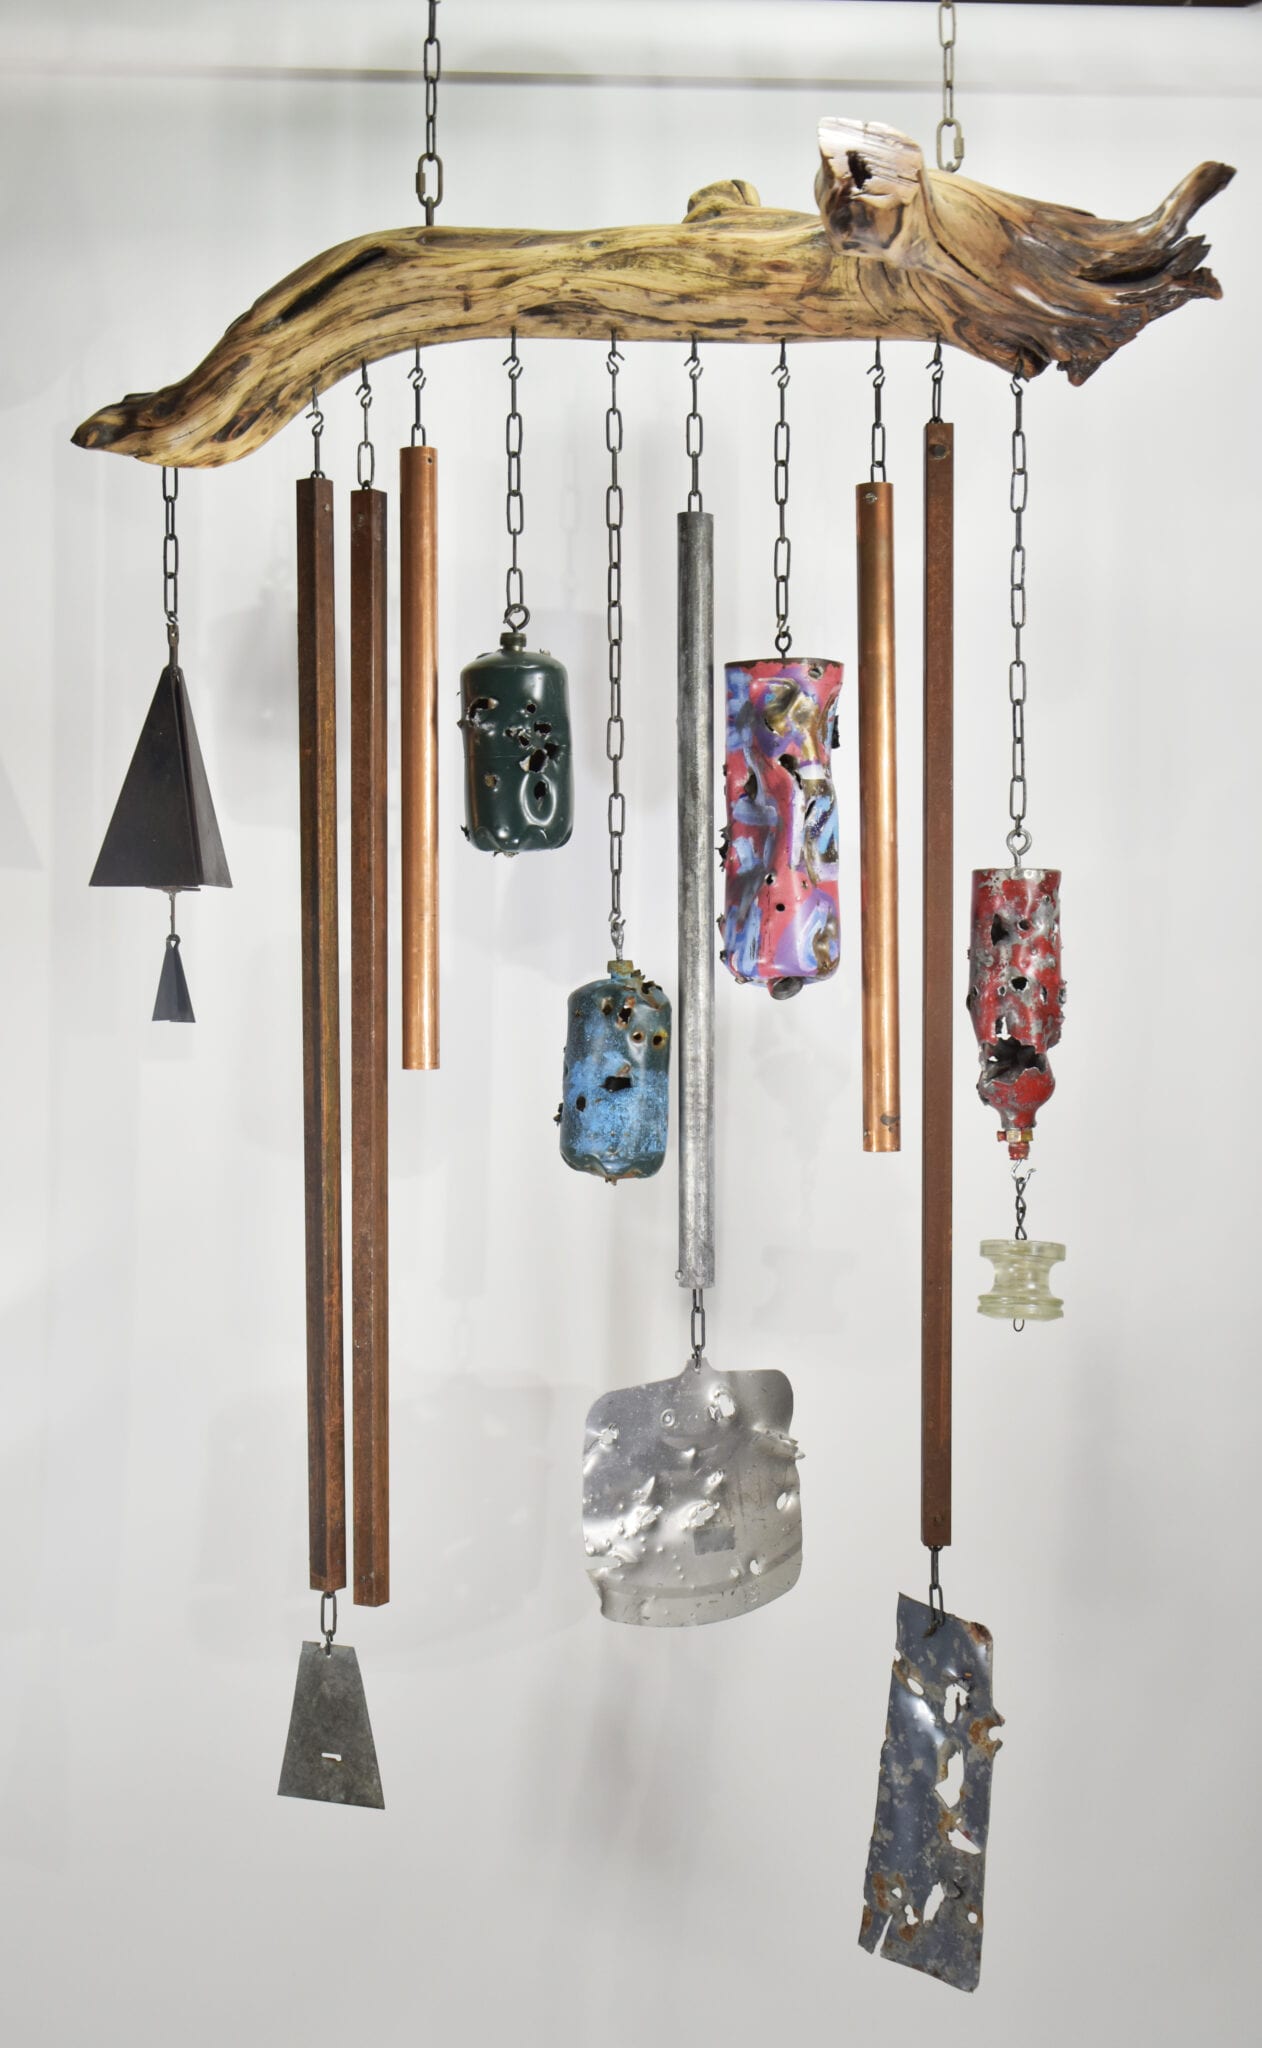 A Giant & beautiful Wind Chime